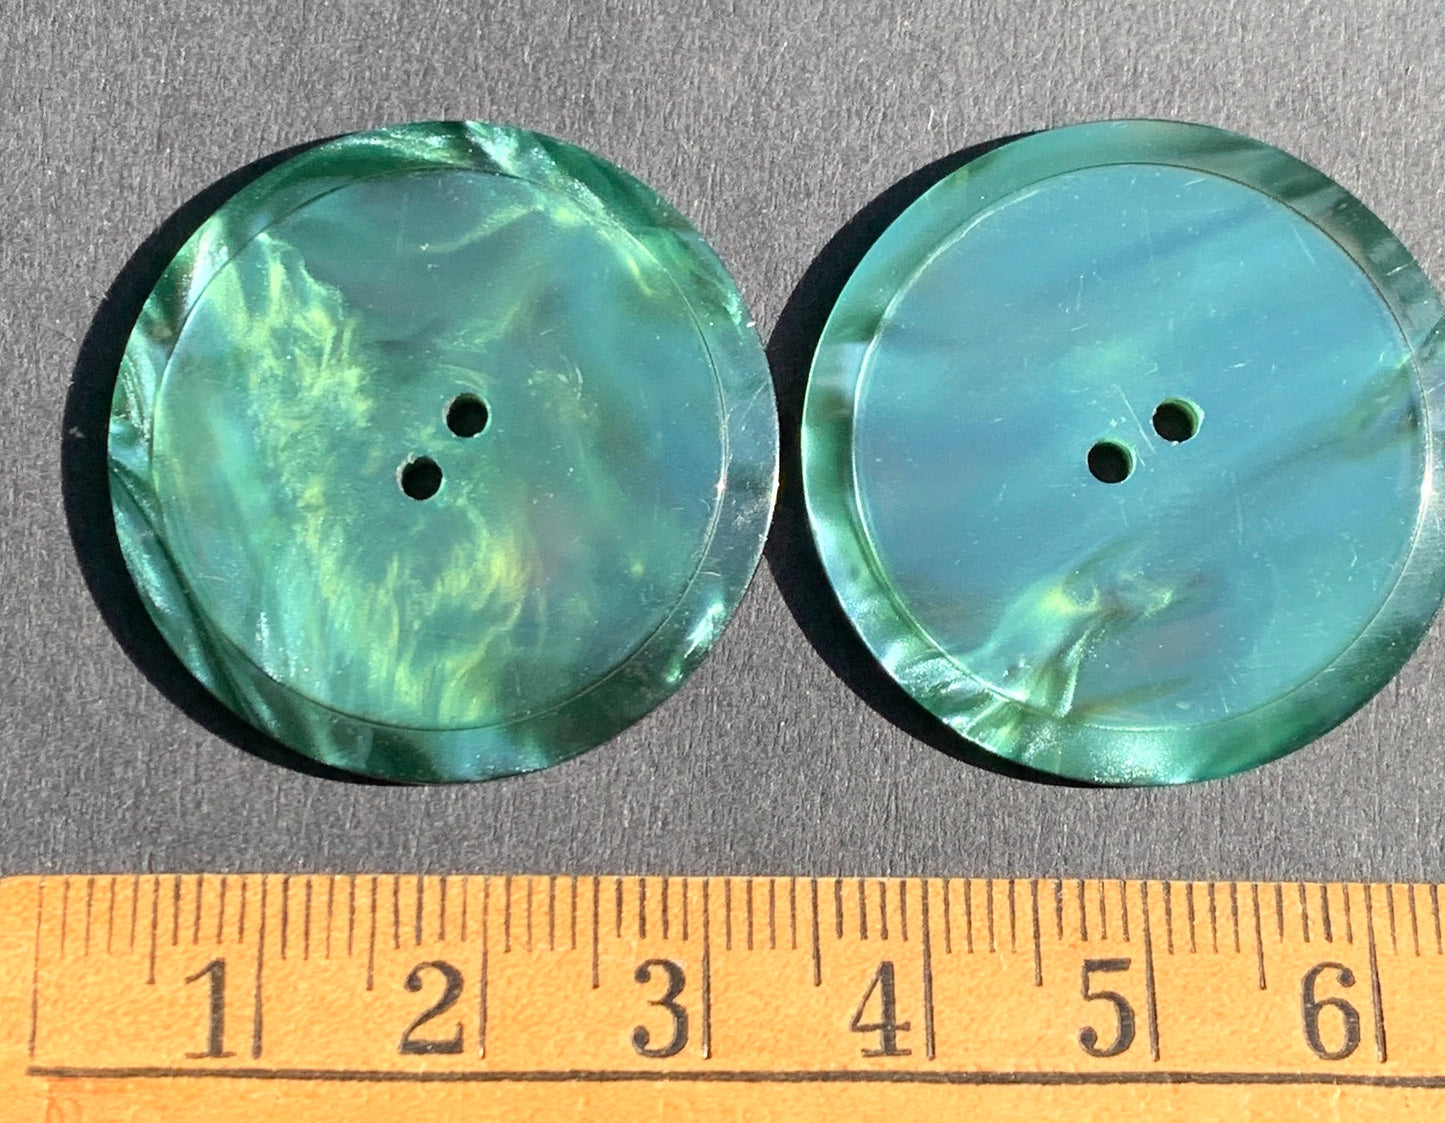 1 Gloriously Shimmery Soft Green Big 3cm Vintage Lucite Button